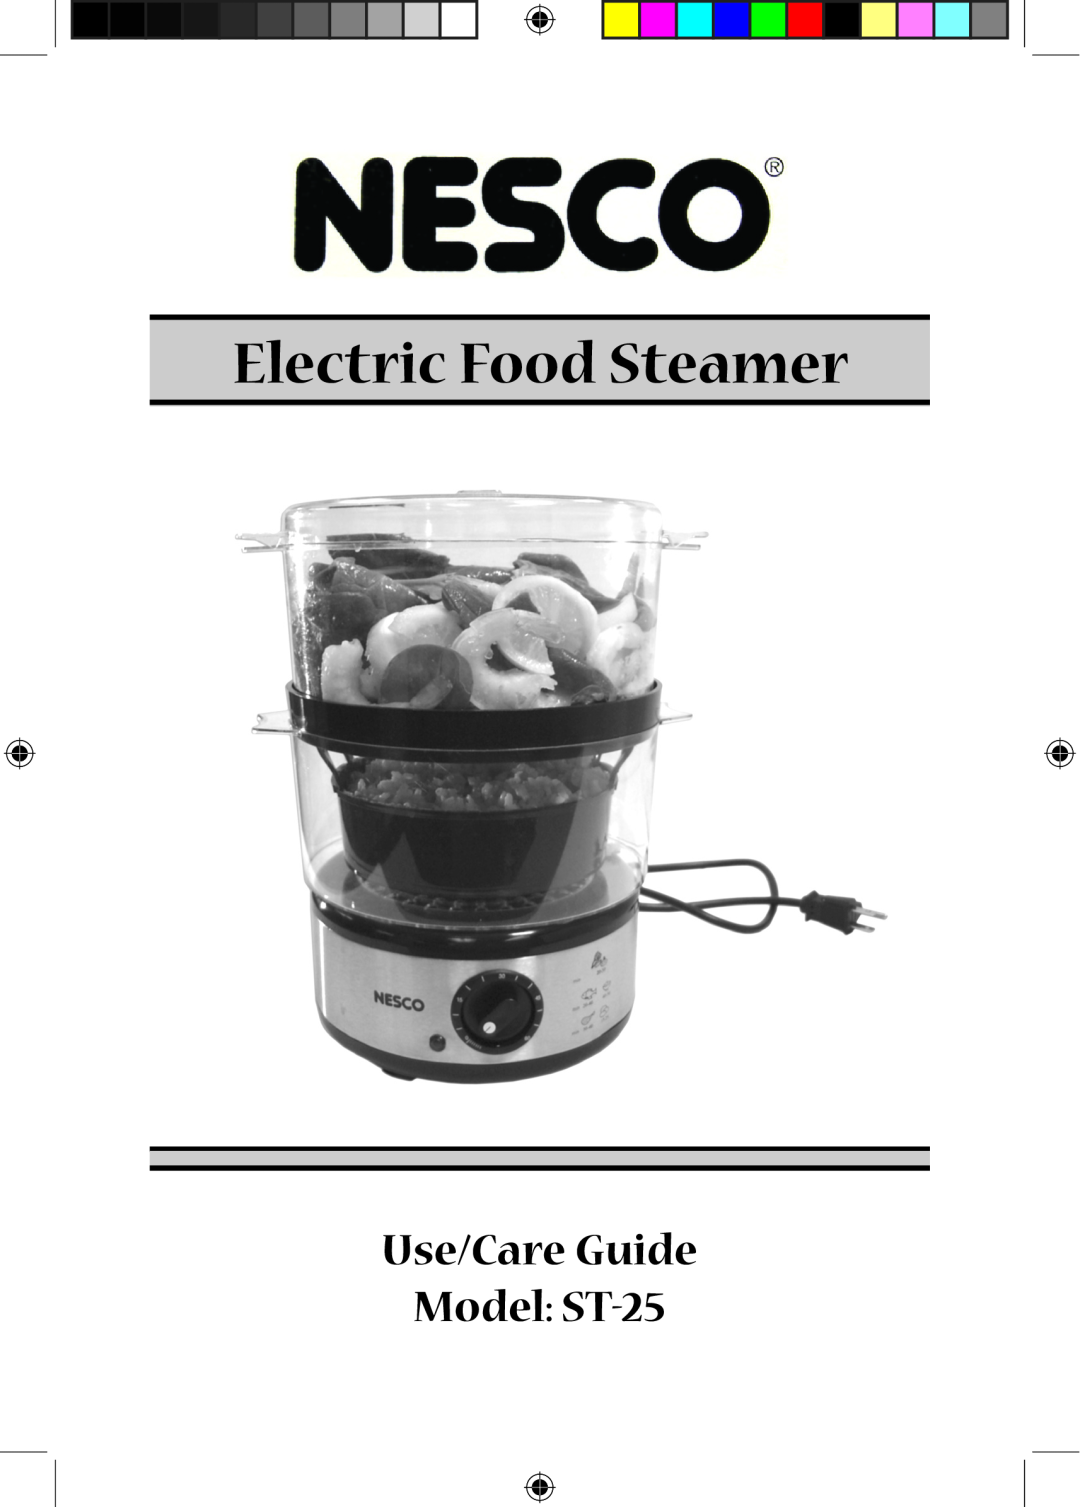 Nesco manual Electric Food Steamer, Use/Care Guide Model ST-25 